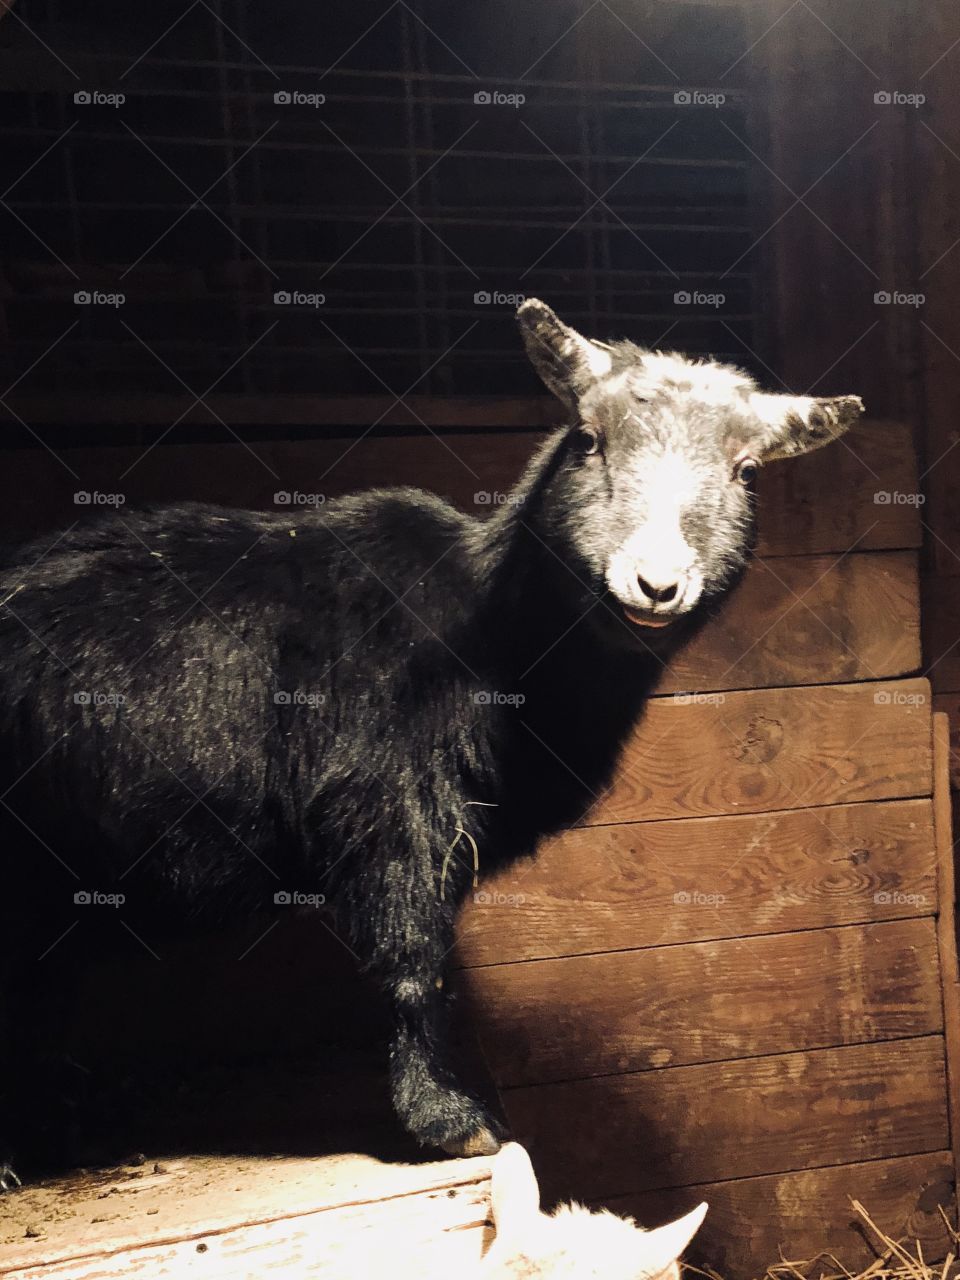 Black Nigerian Dwarf goat sticking her tongue out in barn